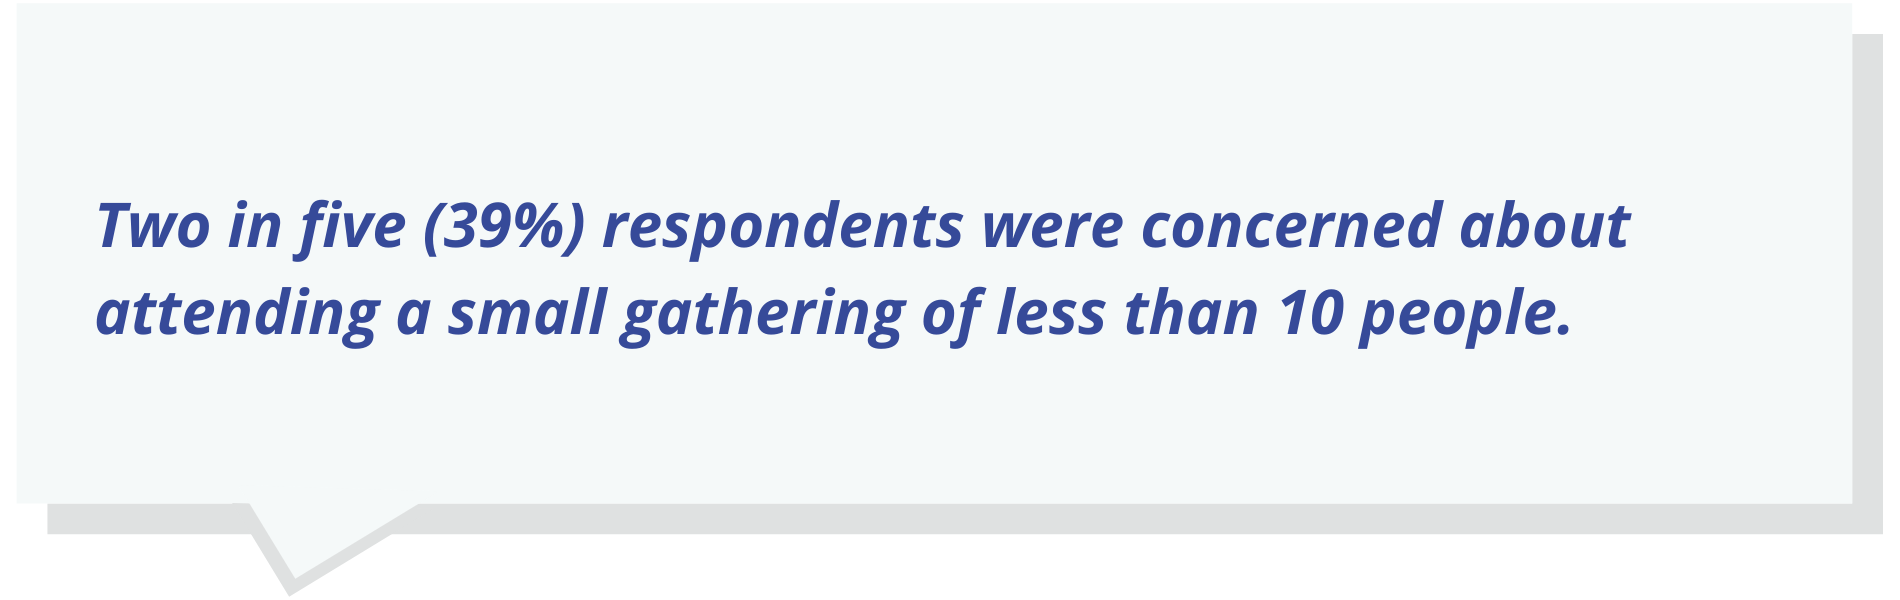 quote text: Two in five (39%) respondents were concerned about attending a small gathering of less than 10 people.